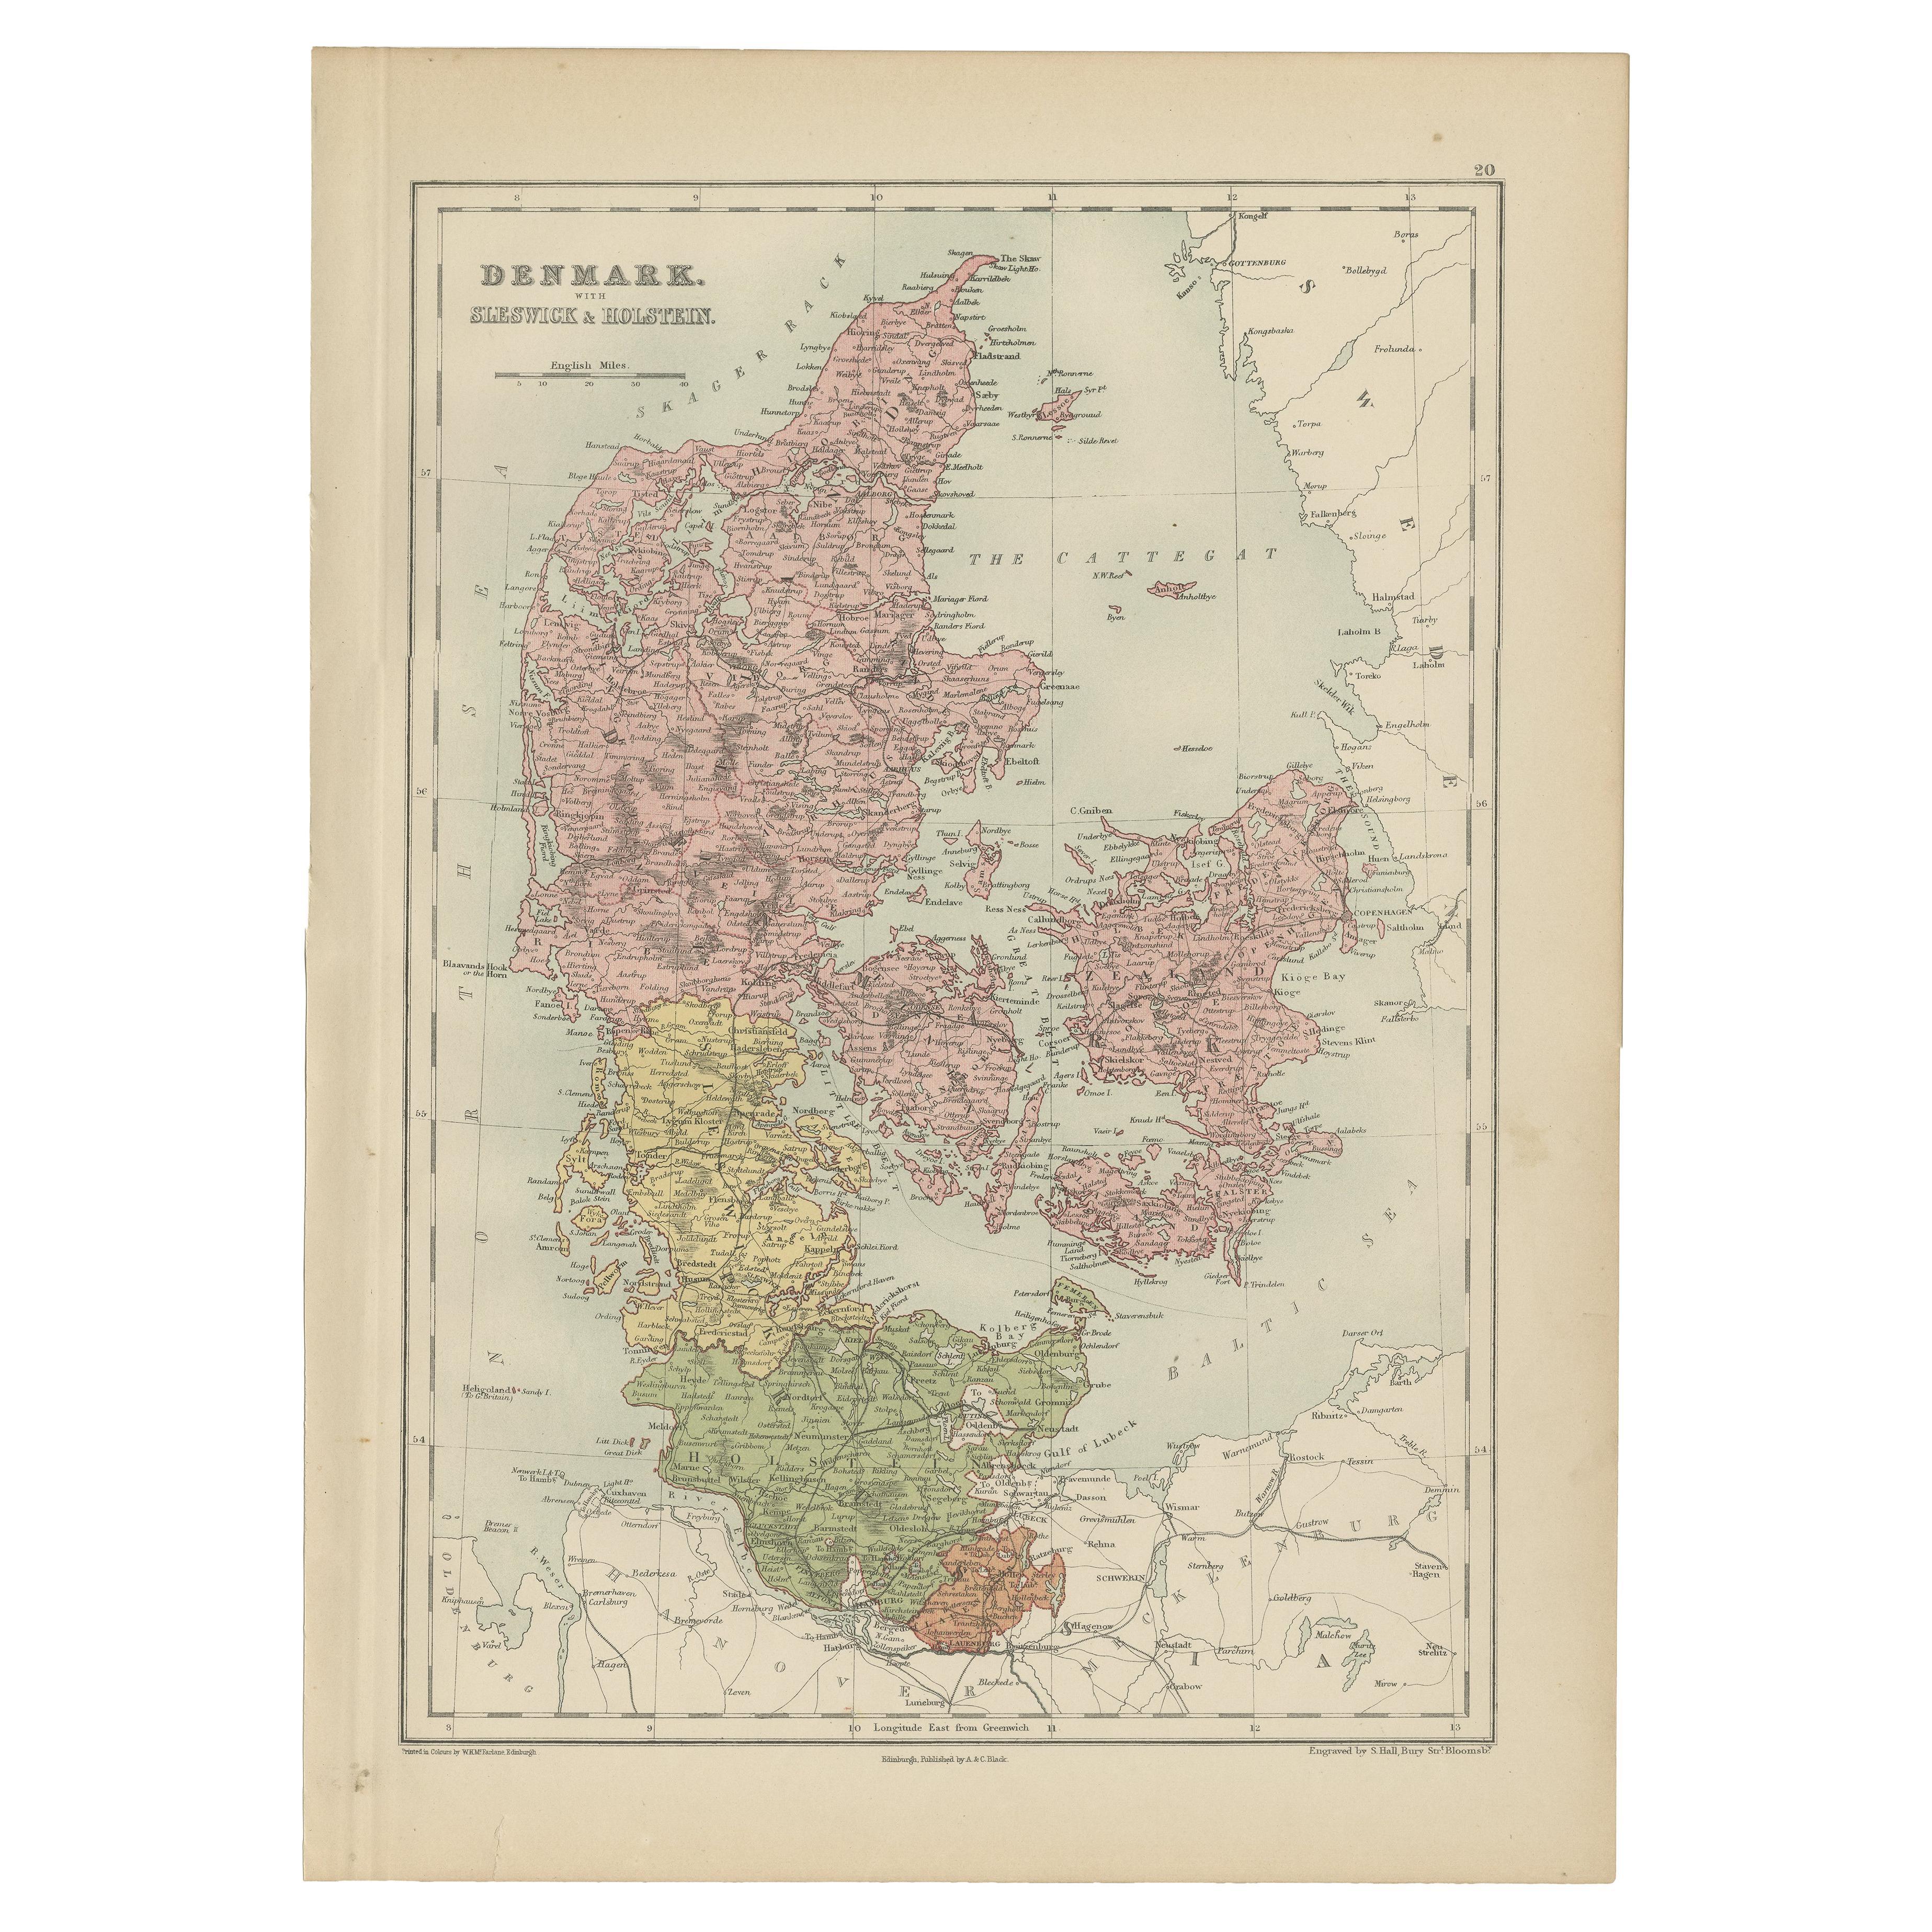 Antique Map of Denmark with Schleswig & Holstein by A & C. Black, 1870